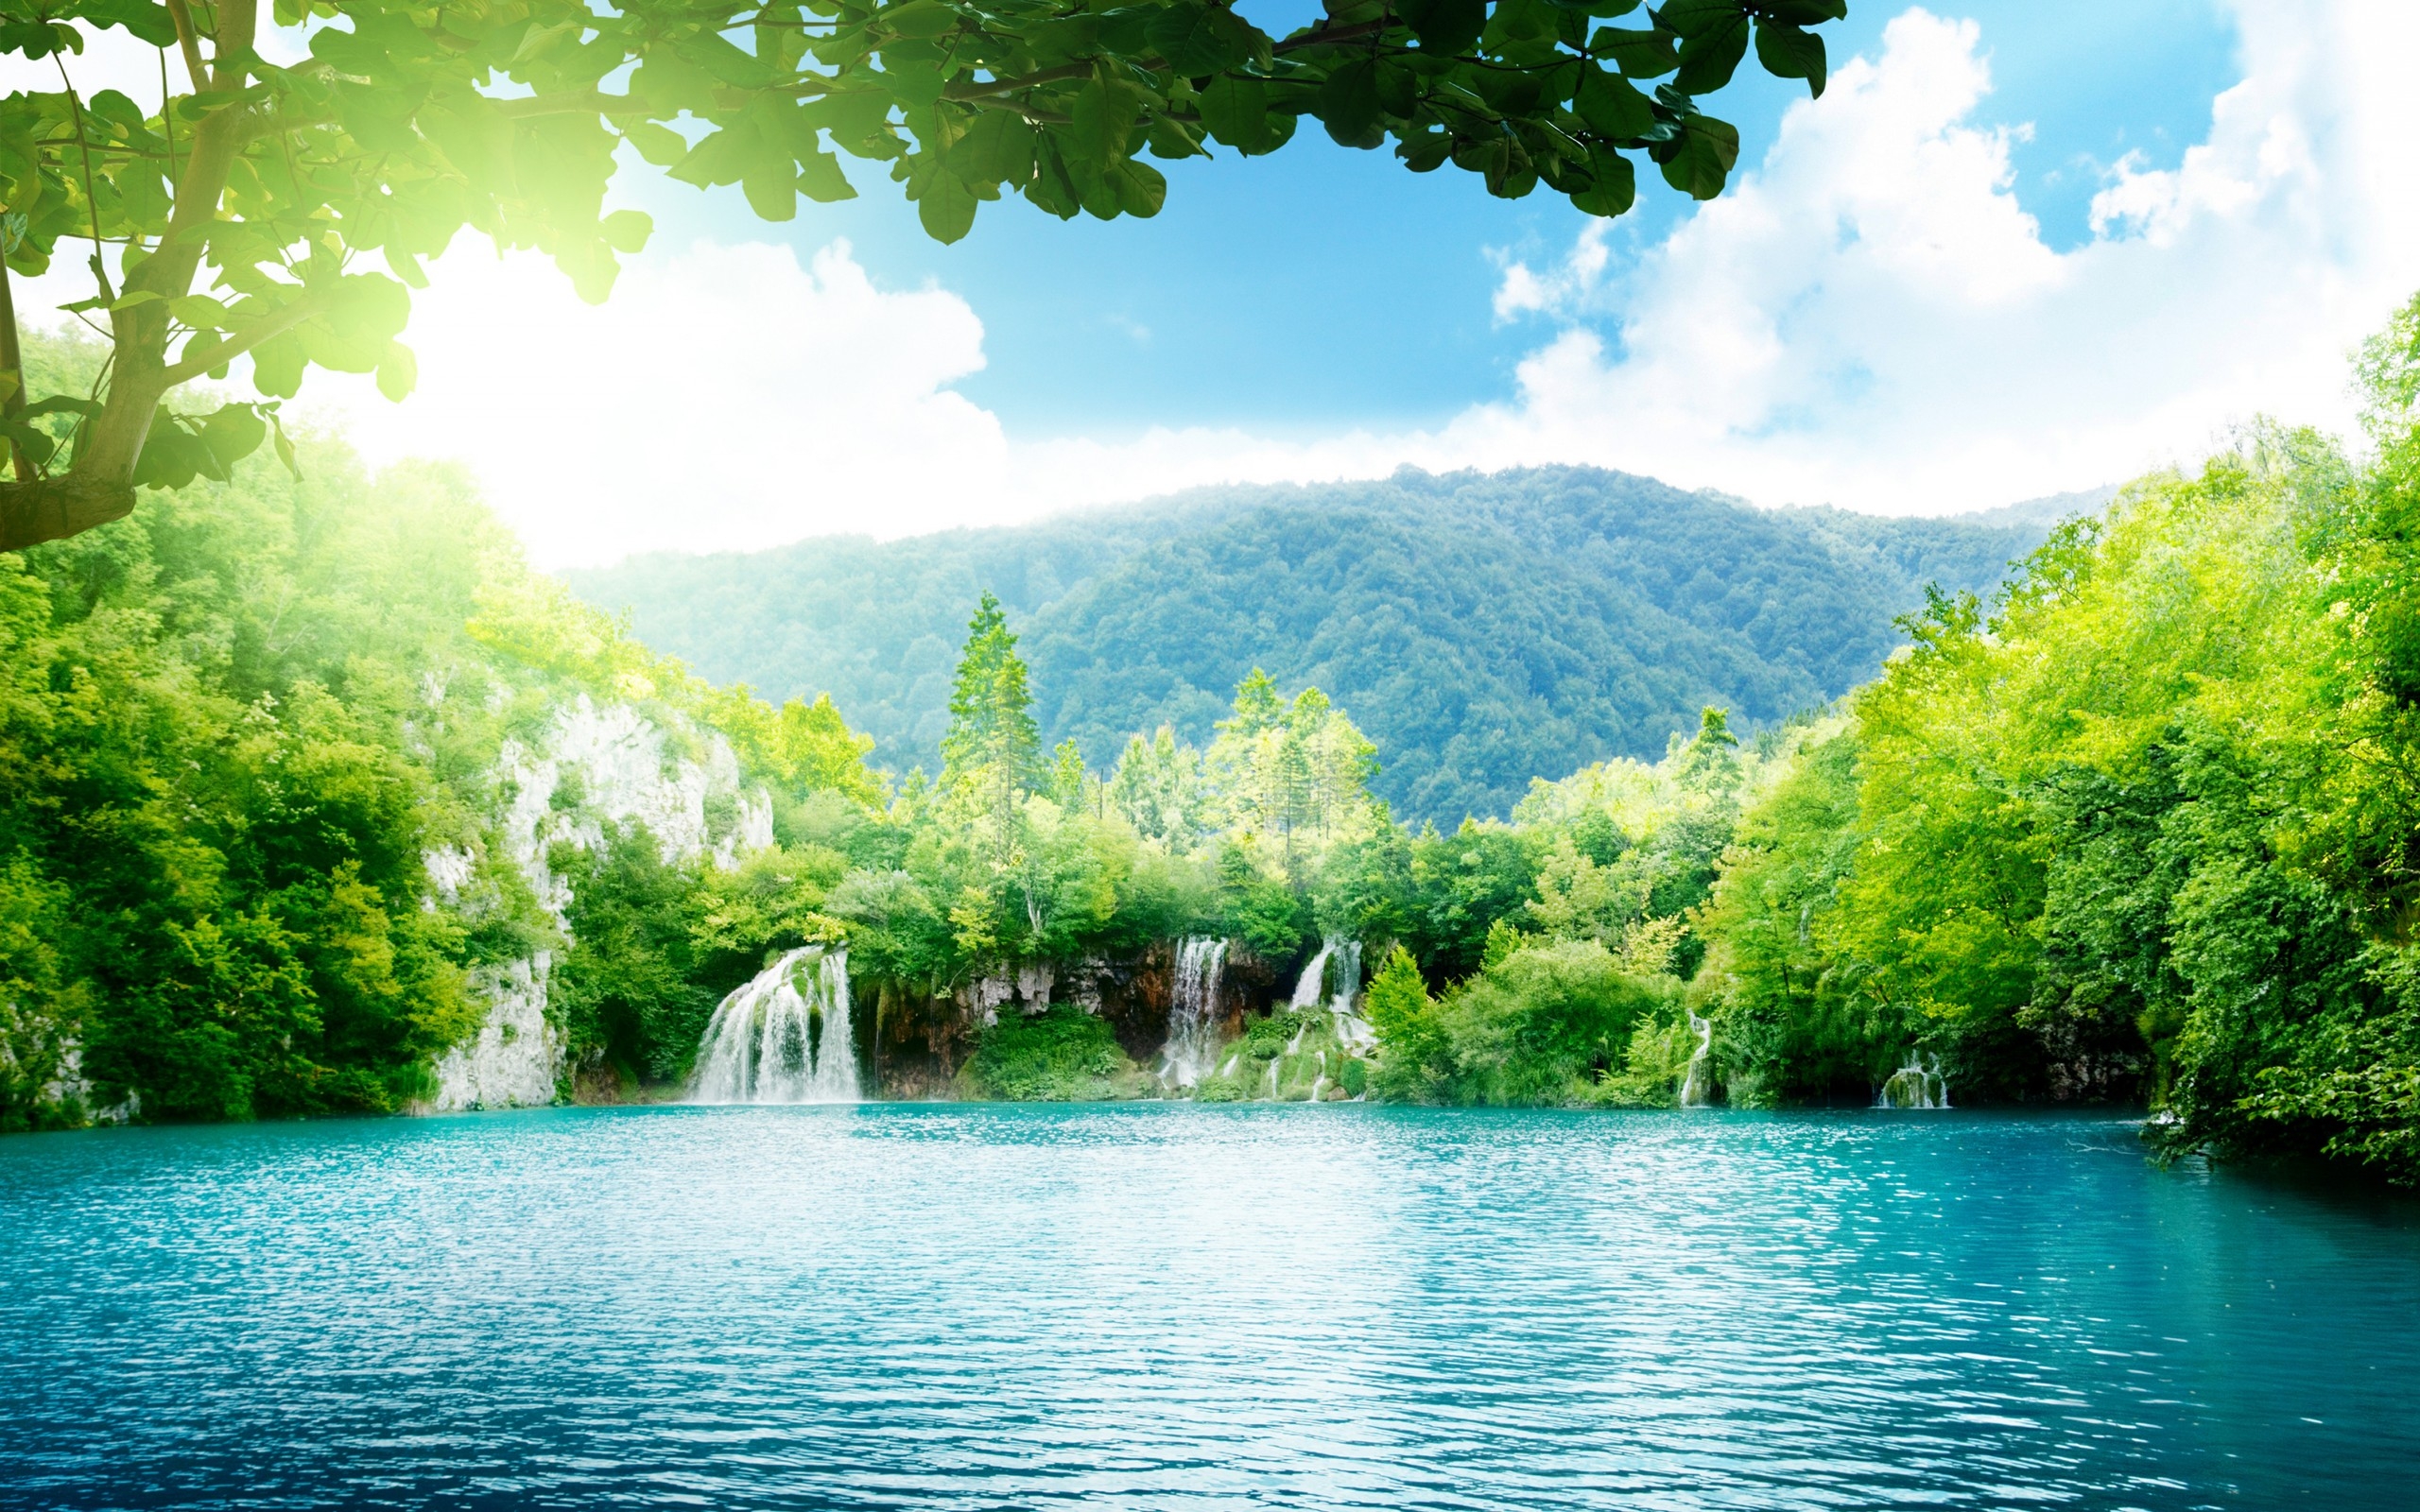 Wallpaper, sunlight, forest, waterfall, lake, nature, reflection, green, river, pond, jungle, tree, meadow, reservoir, habitat, natural environment, atmospheric phenomenon, computer wallpaper, body of water, water feature 2560x1600